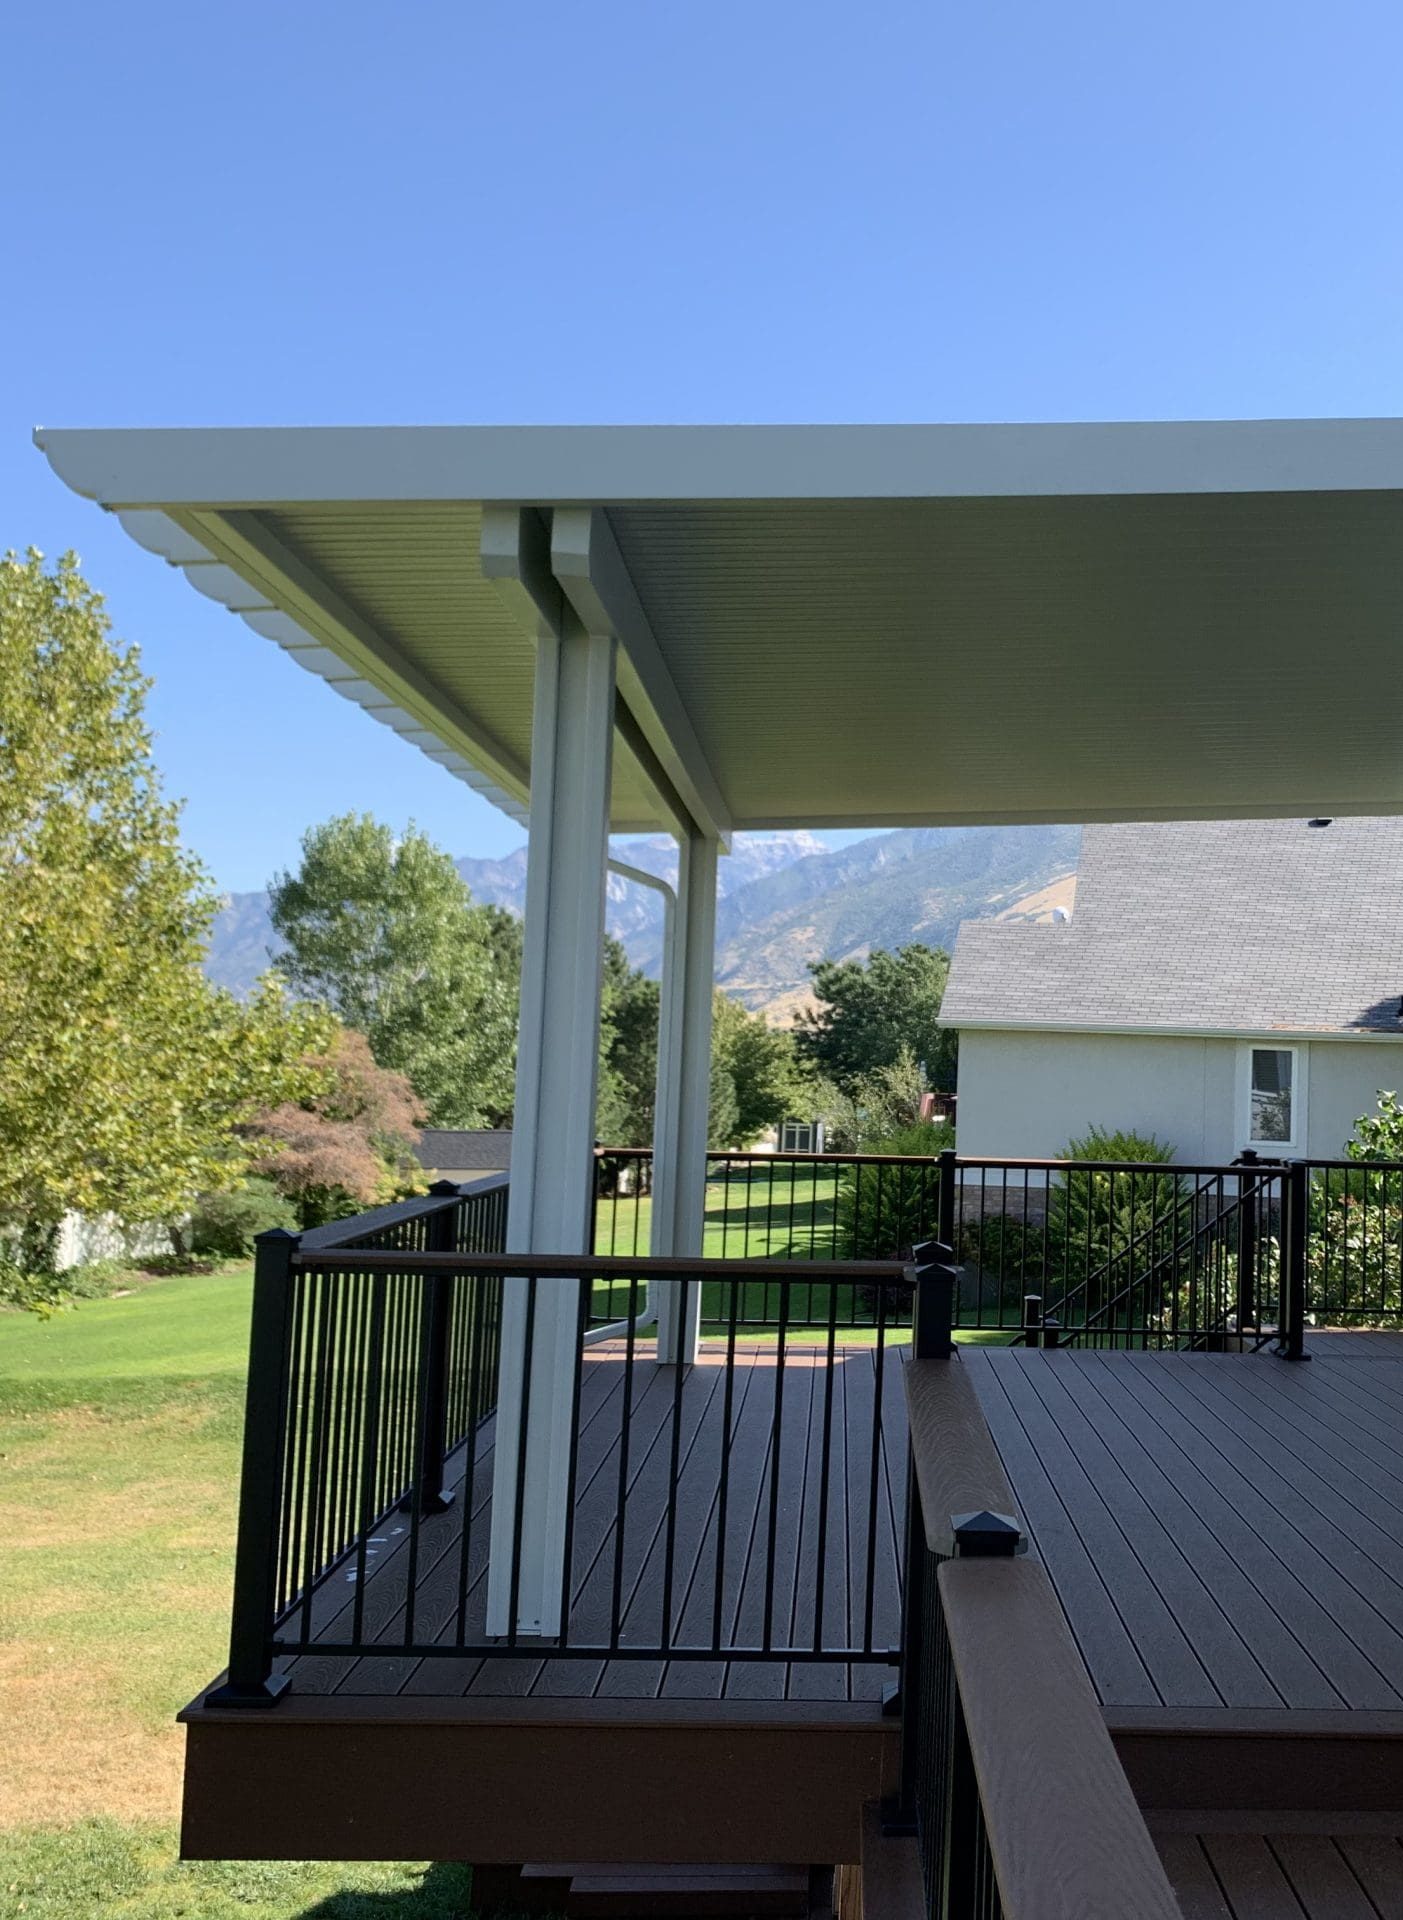 Transform your outdoor living space with a custom deck by Blackrock Decks, your custom deck builders in Spanish Fork.